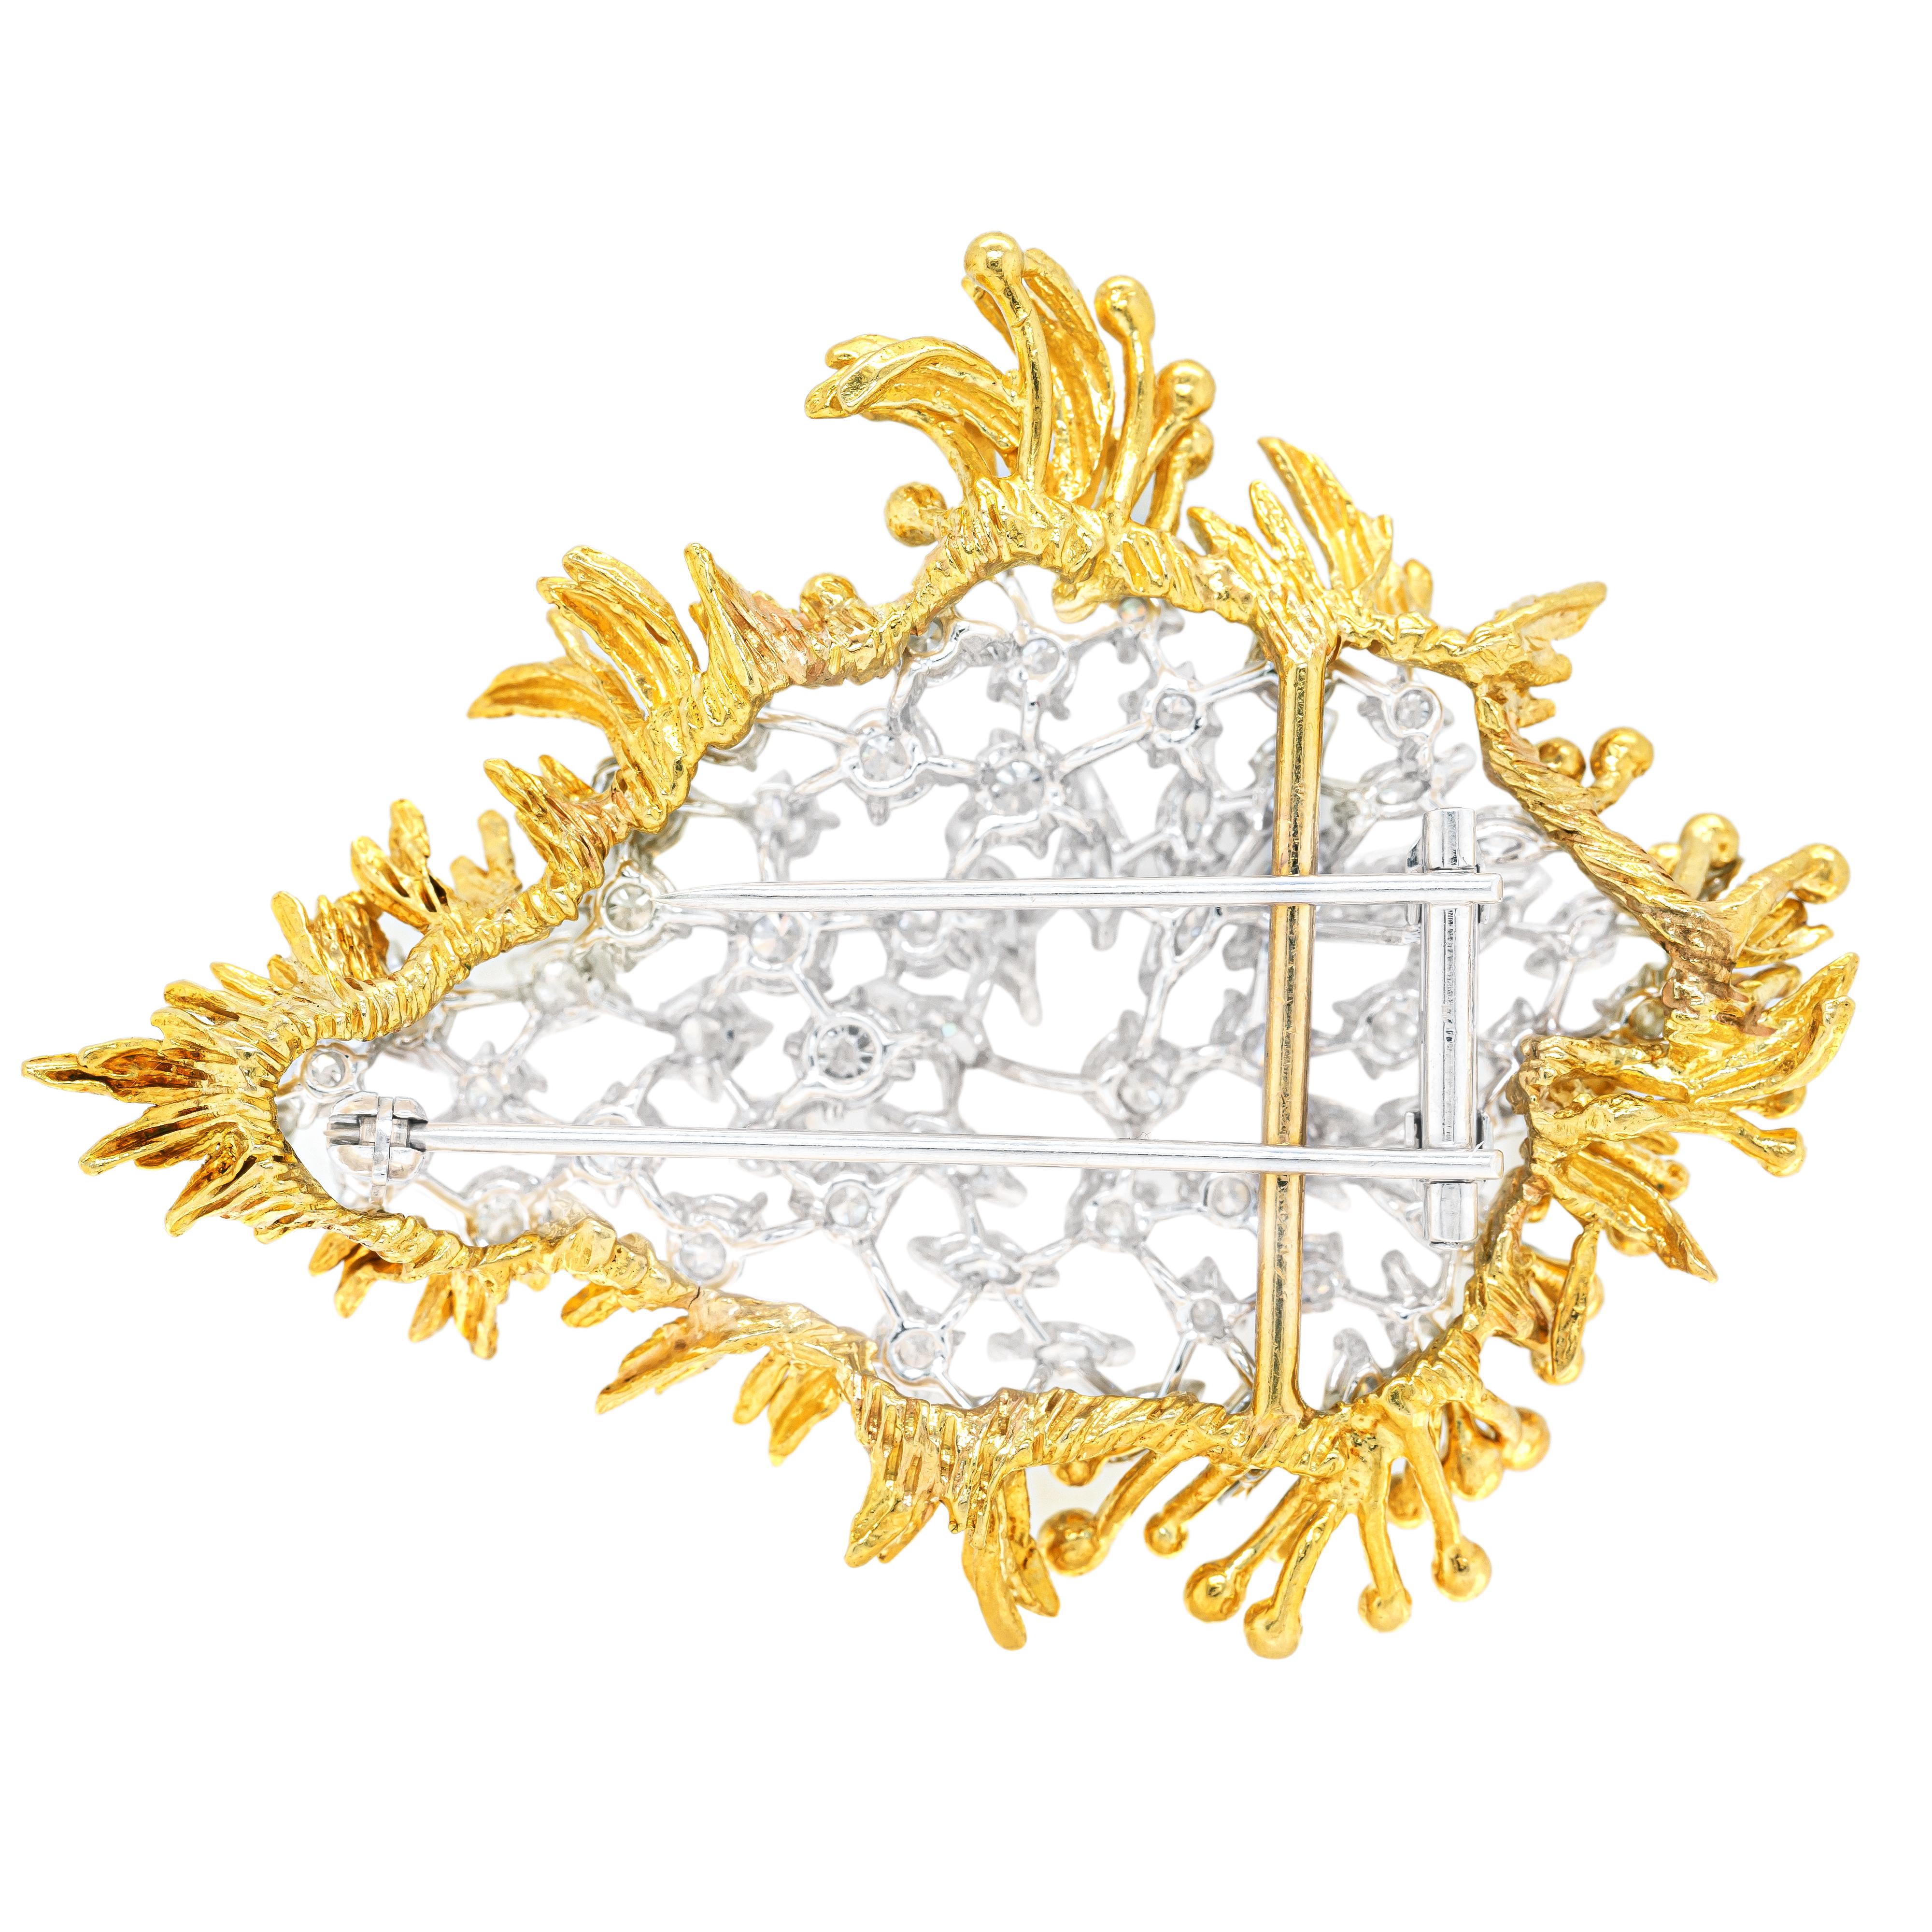 This magnificent one of a kind detachable brooch is beautifully inlaid with a mix of 22 marquise shaped diamonds and 40 round brilliant cut diamonds, all meticulously claw set on an 18 carat white gold open work base. The brooch's exquisite centre